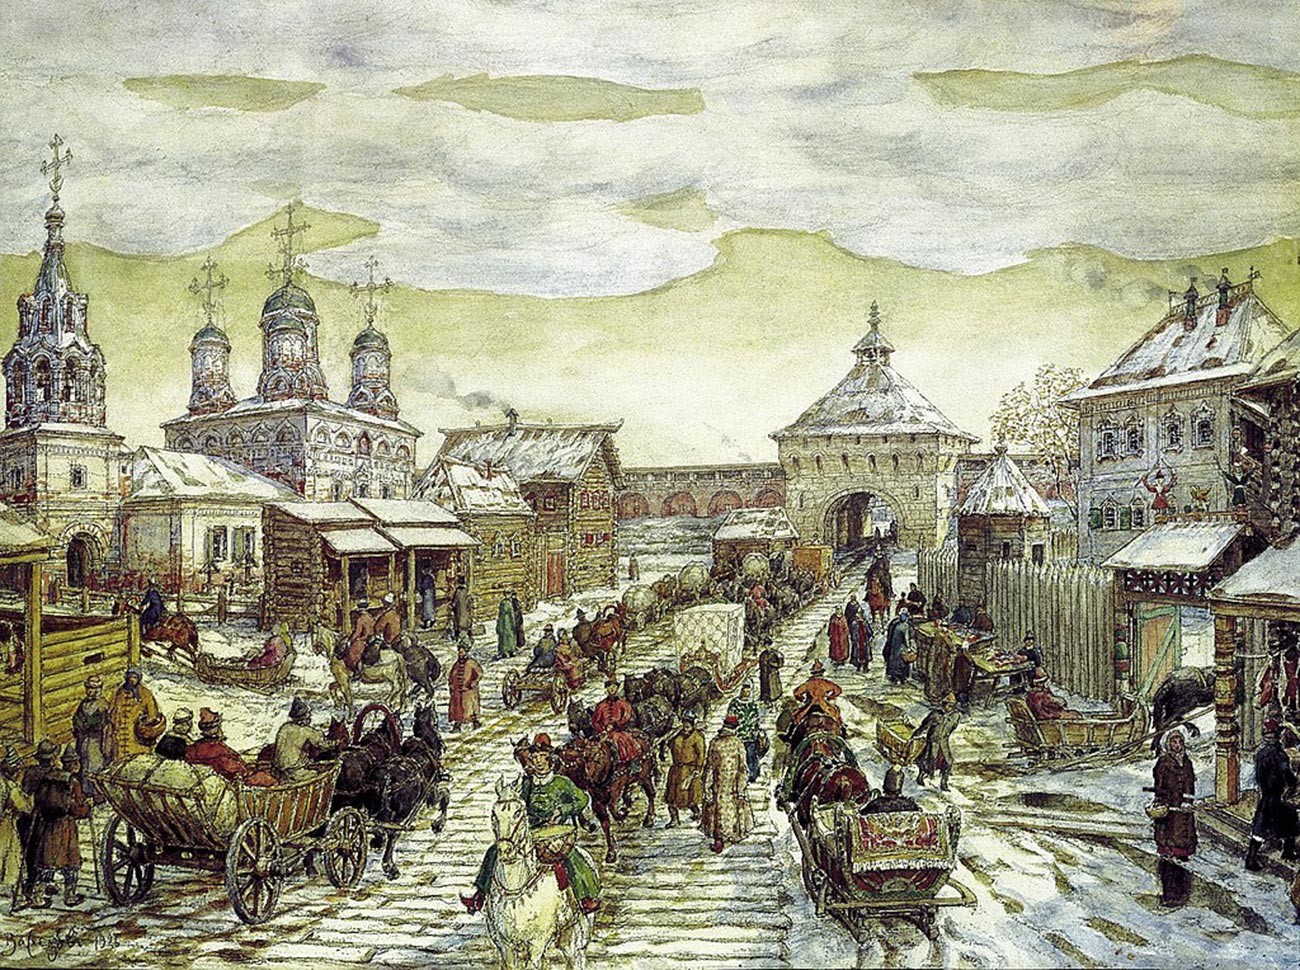 Apollinary Vasnetsov. At the Myasnitsky Gate of the White City in the 17th century